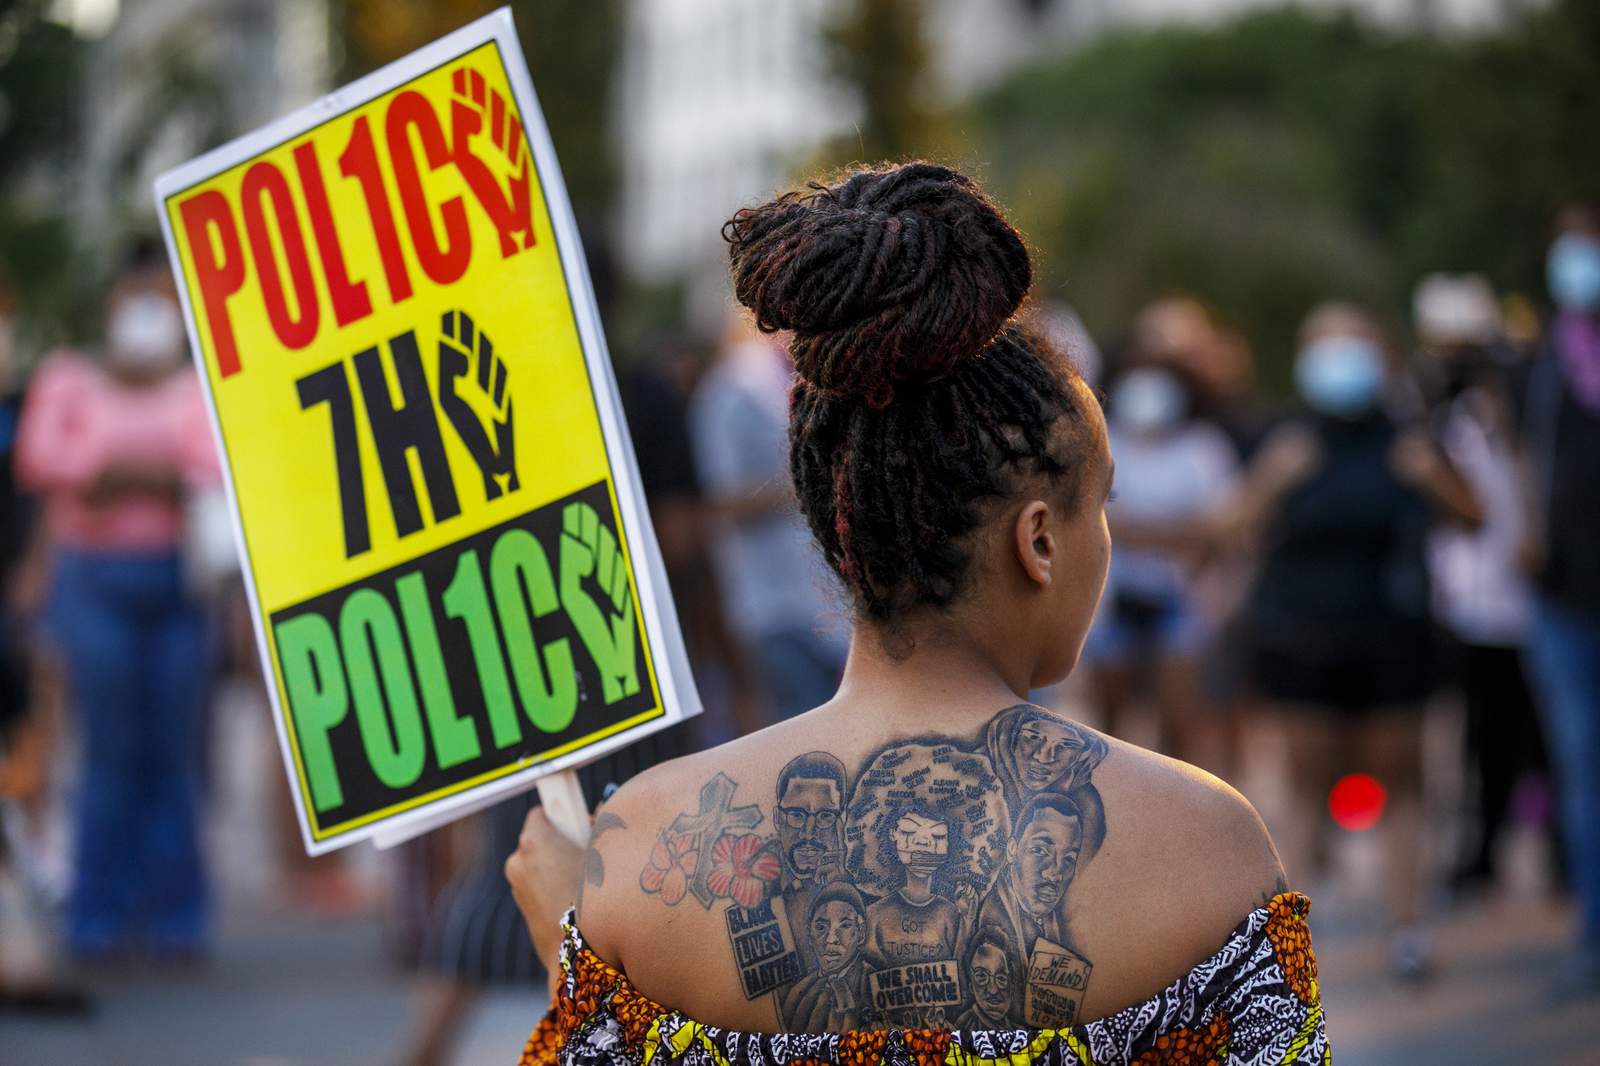 AP-NORC poll: Sweeping change in US views of police violence